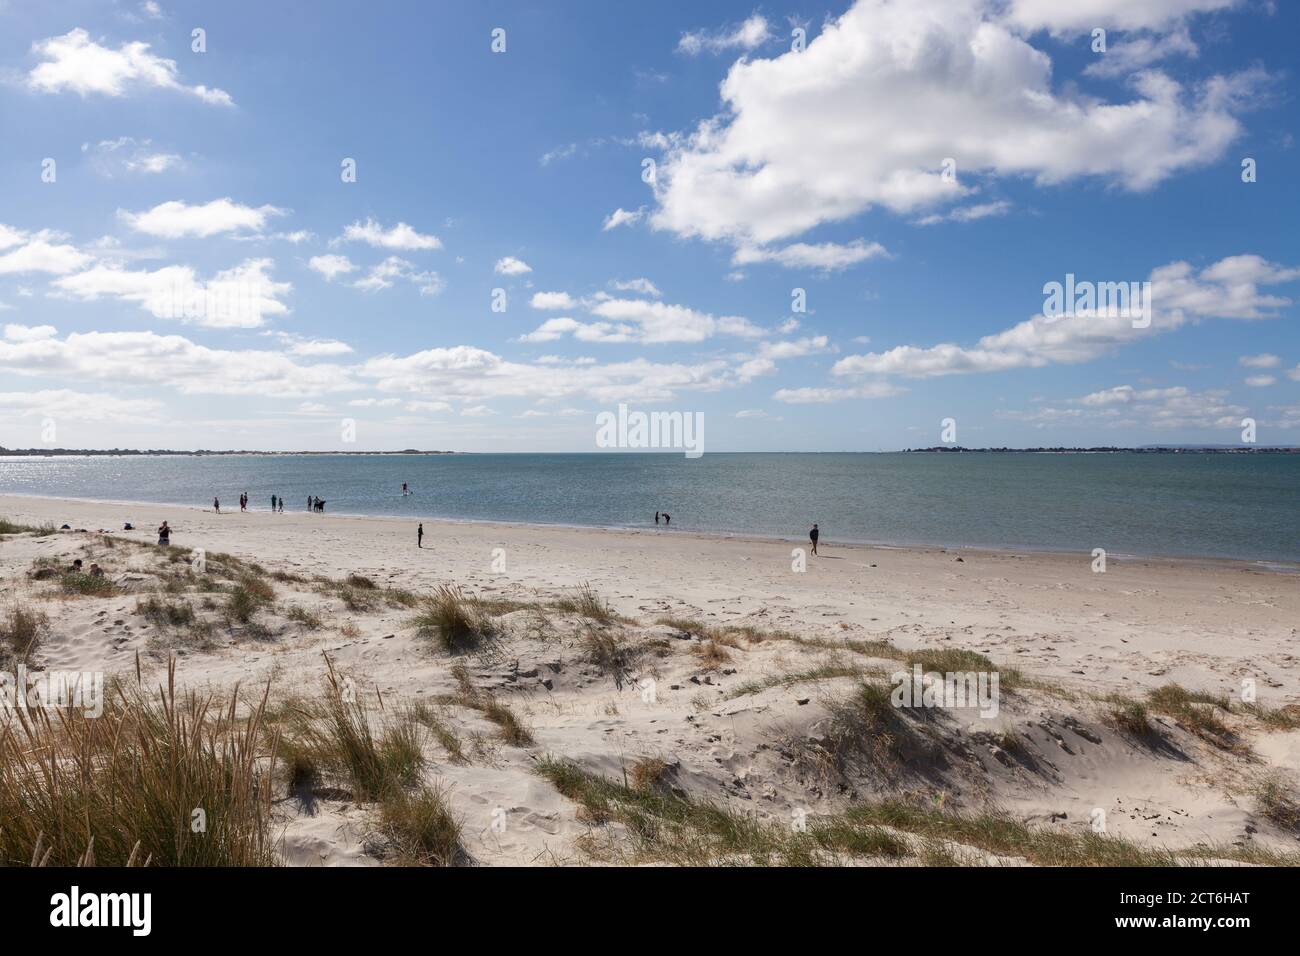 Remote sandy beach on Thorney Island that juts into Chichester Harbour in West Sussex. Stock Photo